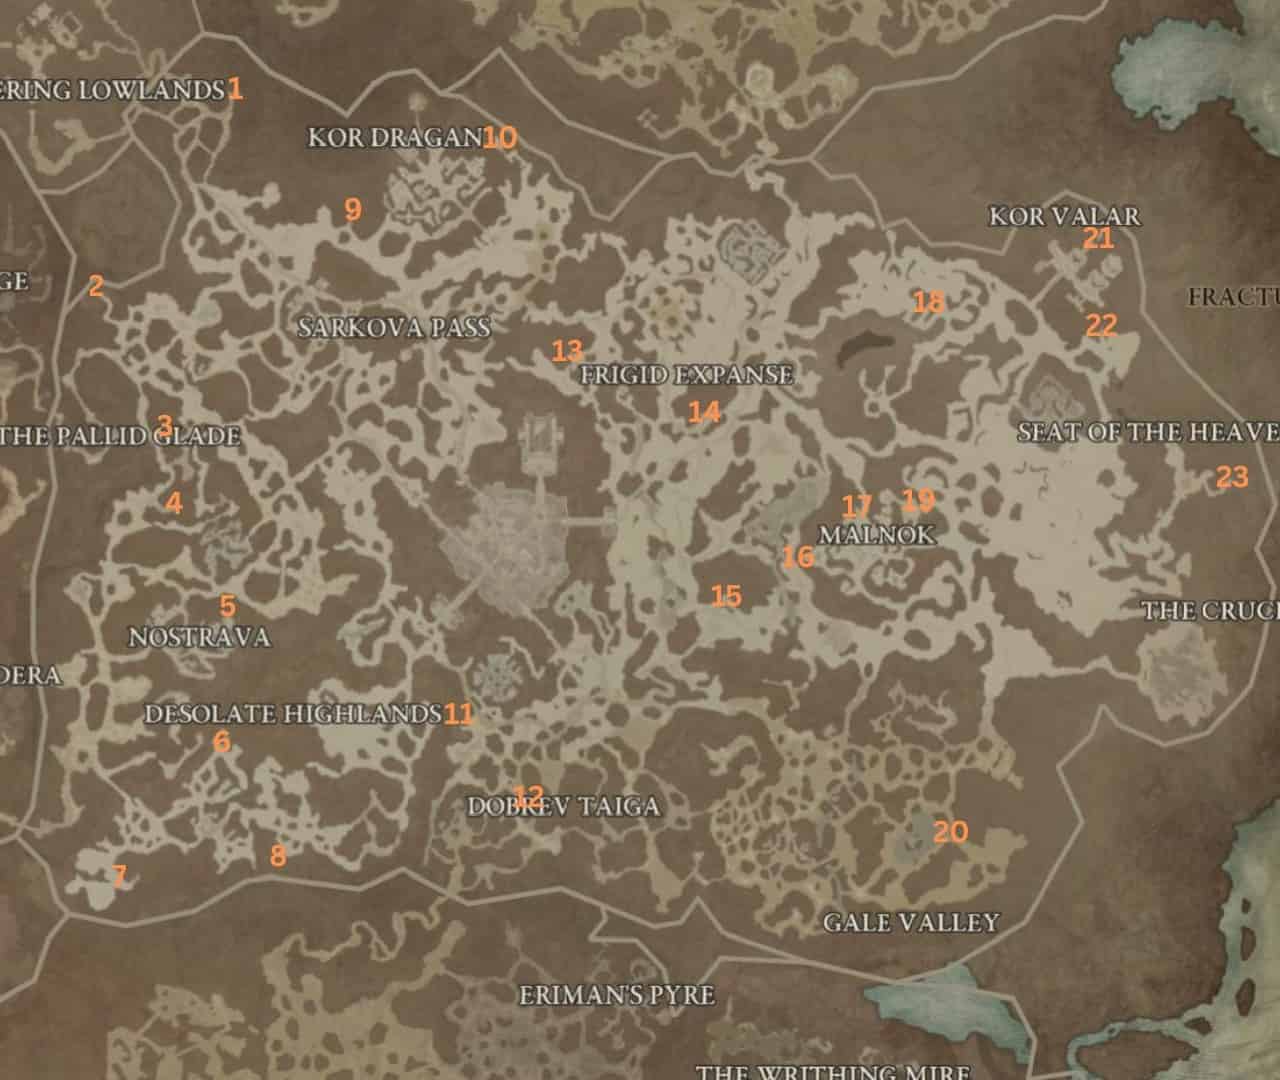 Diablo 4 Dungeons: A map of Diablo 4's Fractured Peaks region with dungeons marked on it.